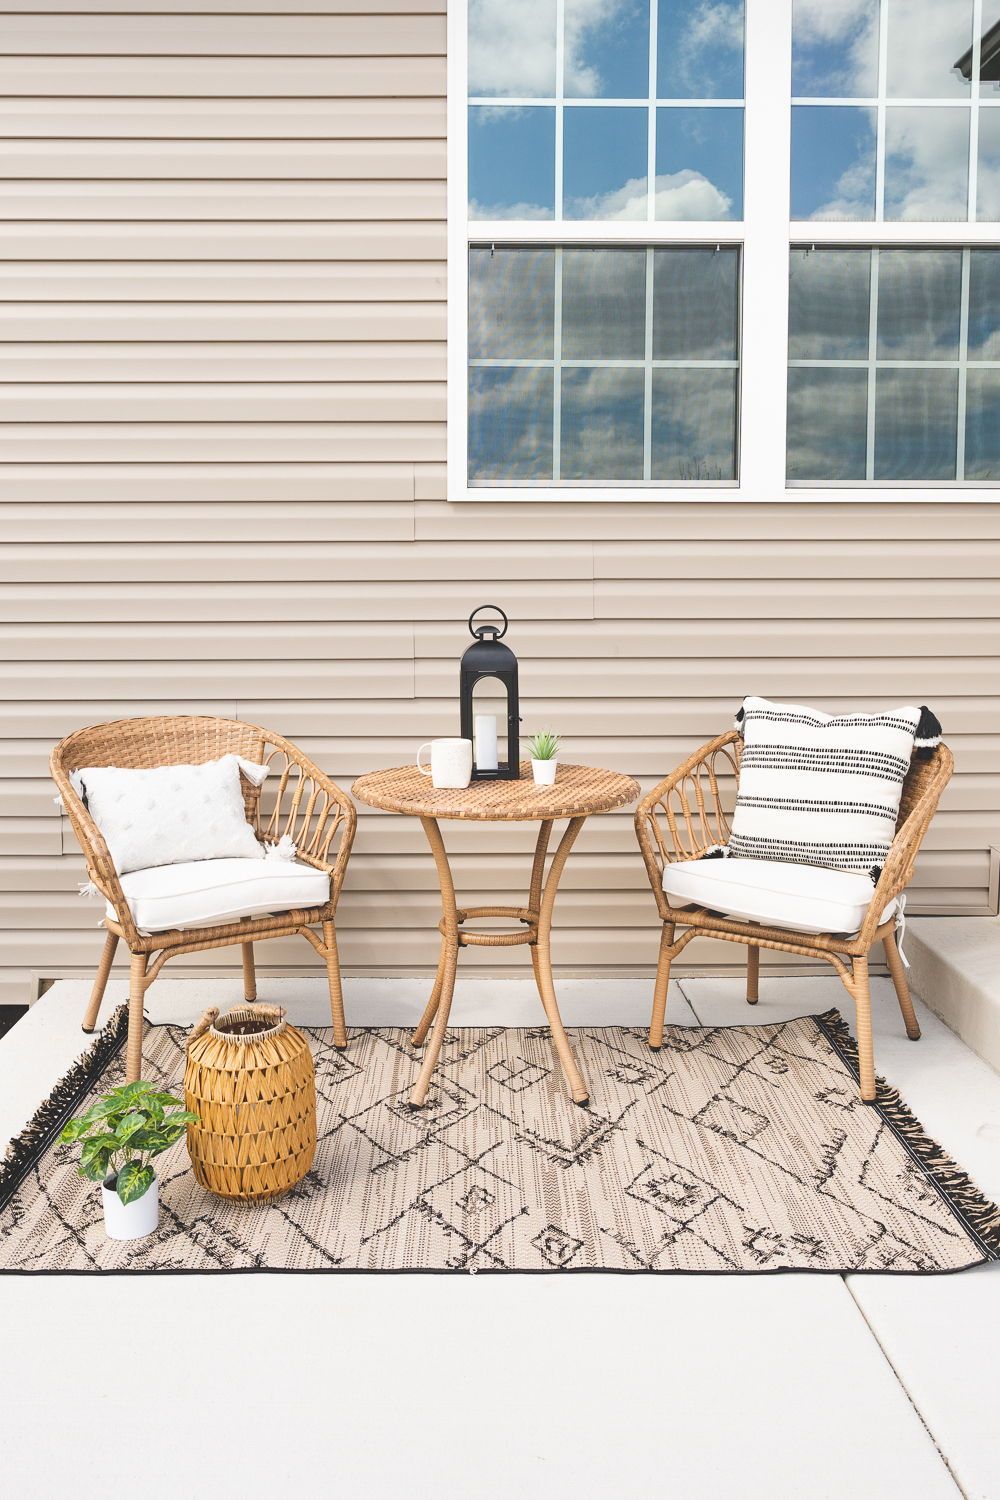 Creative Ways to Maximize Your Outdoor Space with Small Patio Ideas